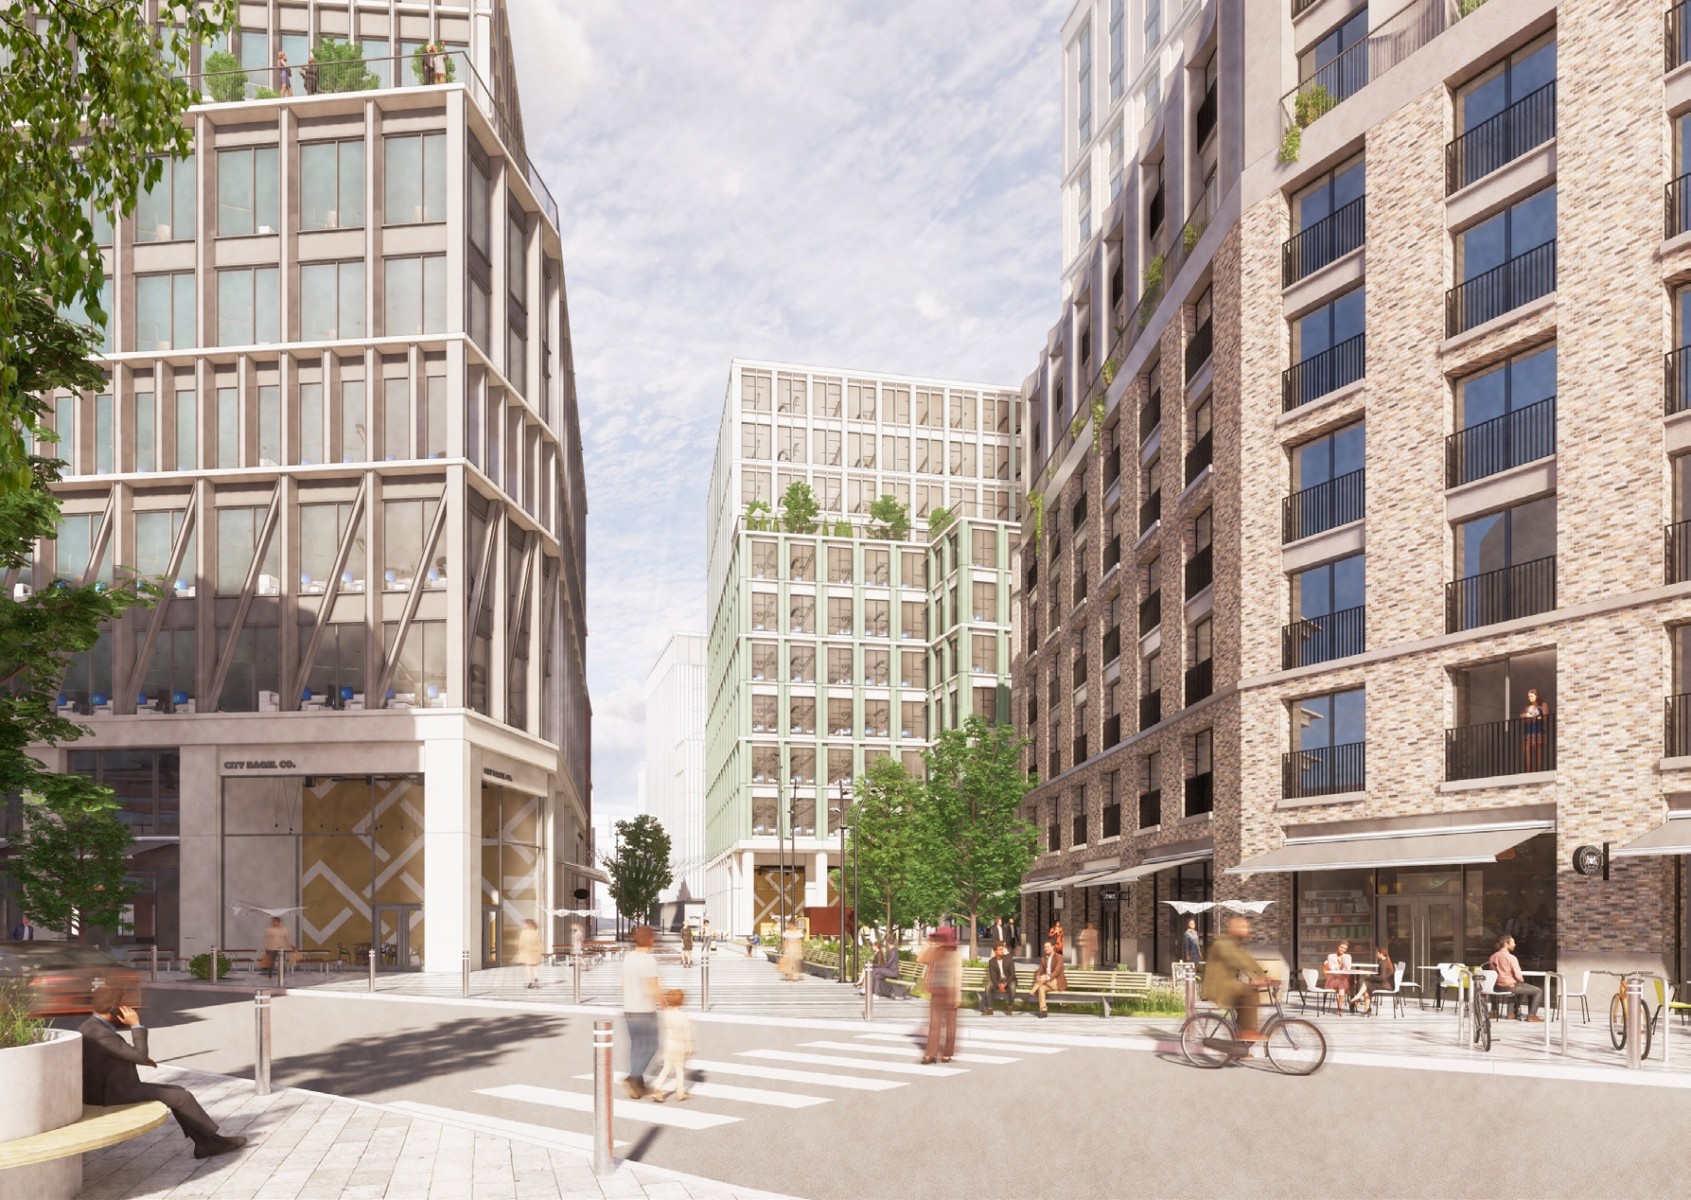 Mixed-use transformation for Glasgow car park site approved in principle